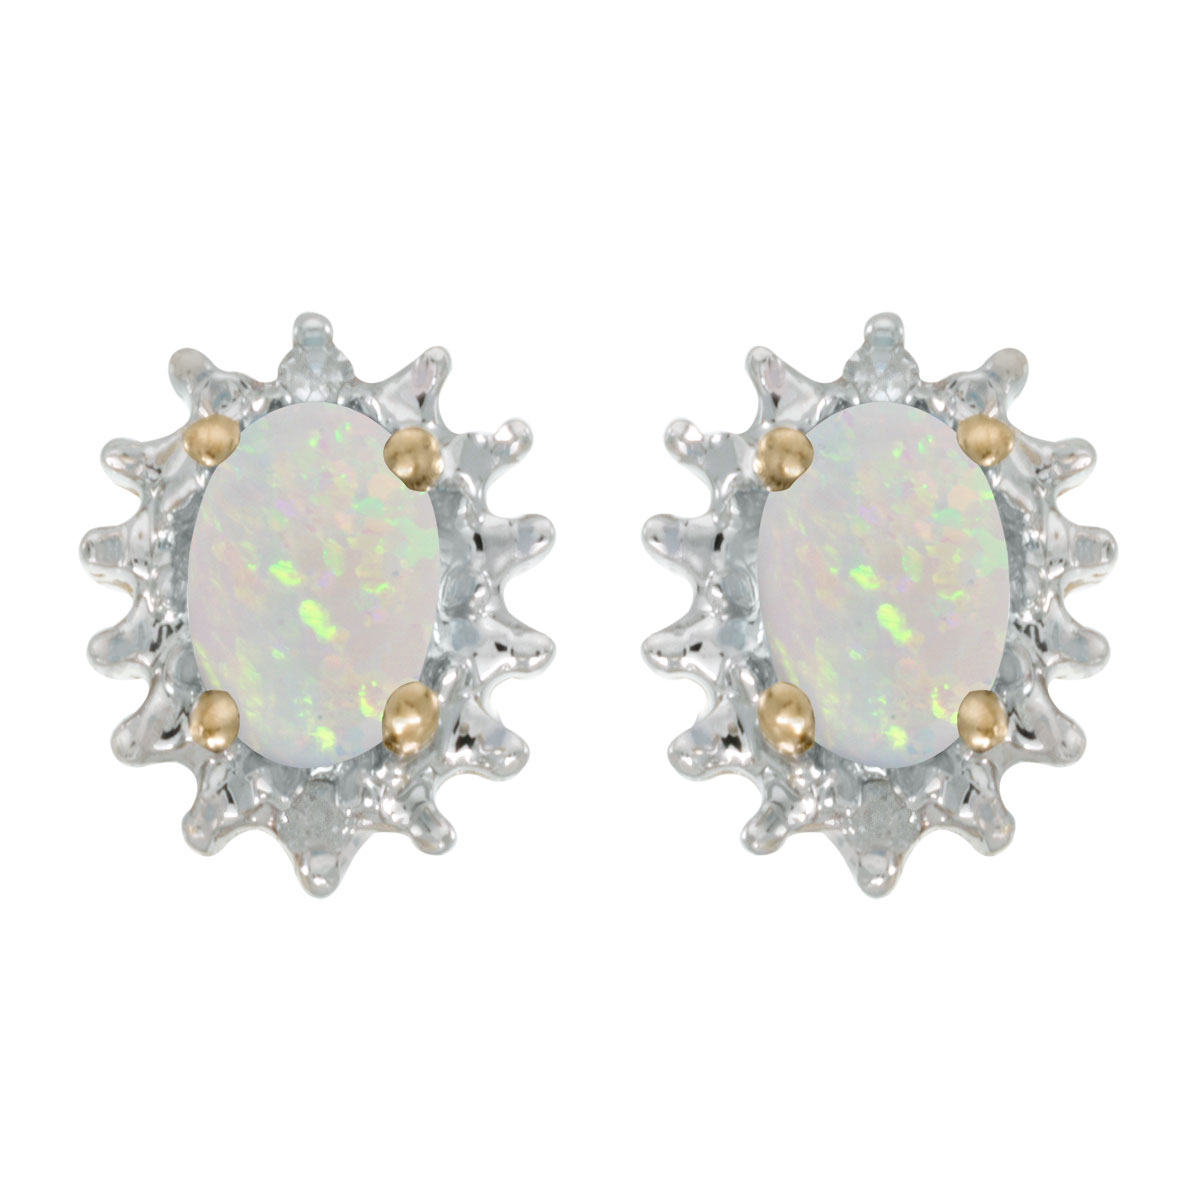 These 14k yellow gold oval opal and diamond earrings feature 6x4 mm genuine natural opals with a 0.38 ct total weight and .04 ct diamonds.